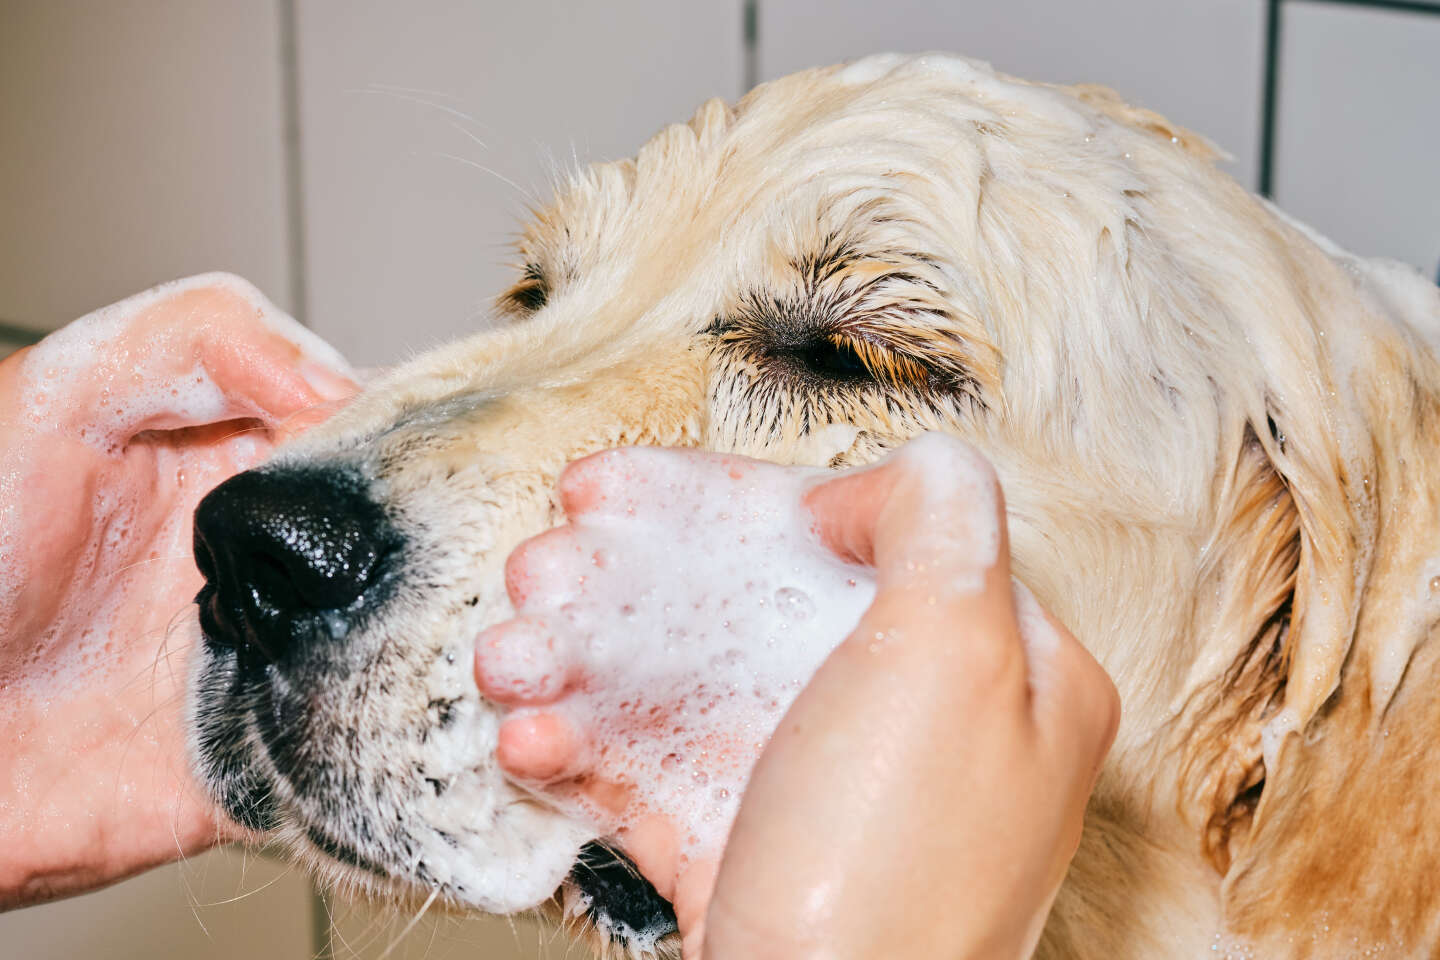 Shampooed, “pattucured”, hydrated, are pets treated too well?